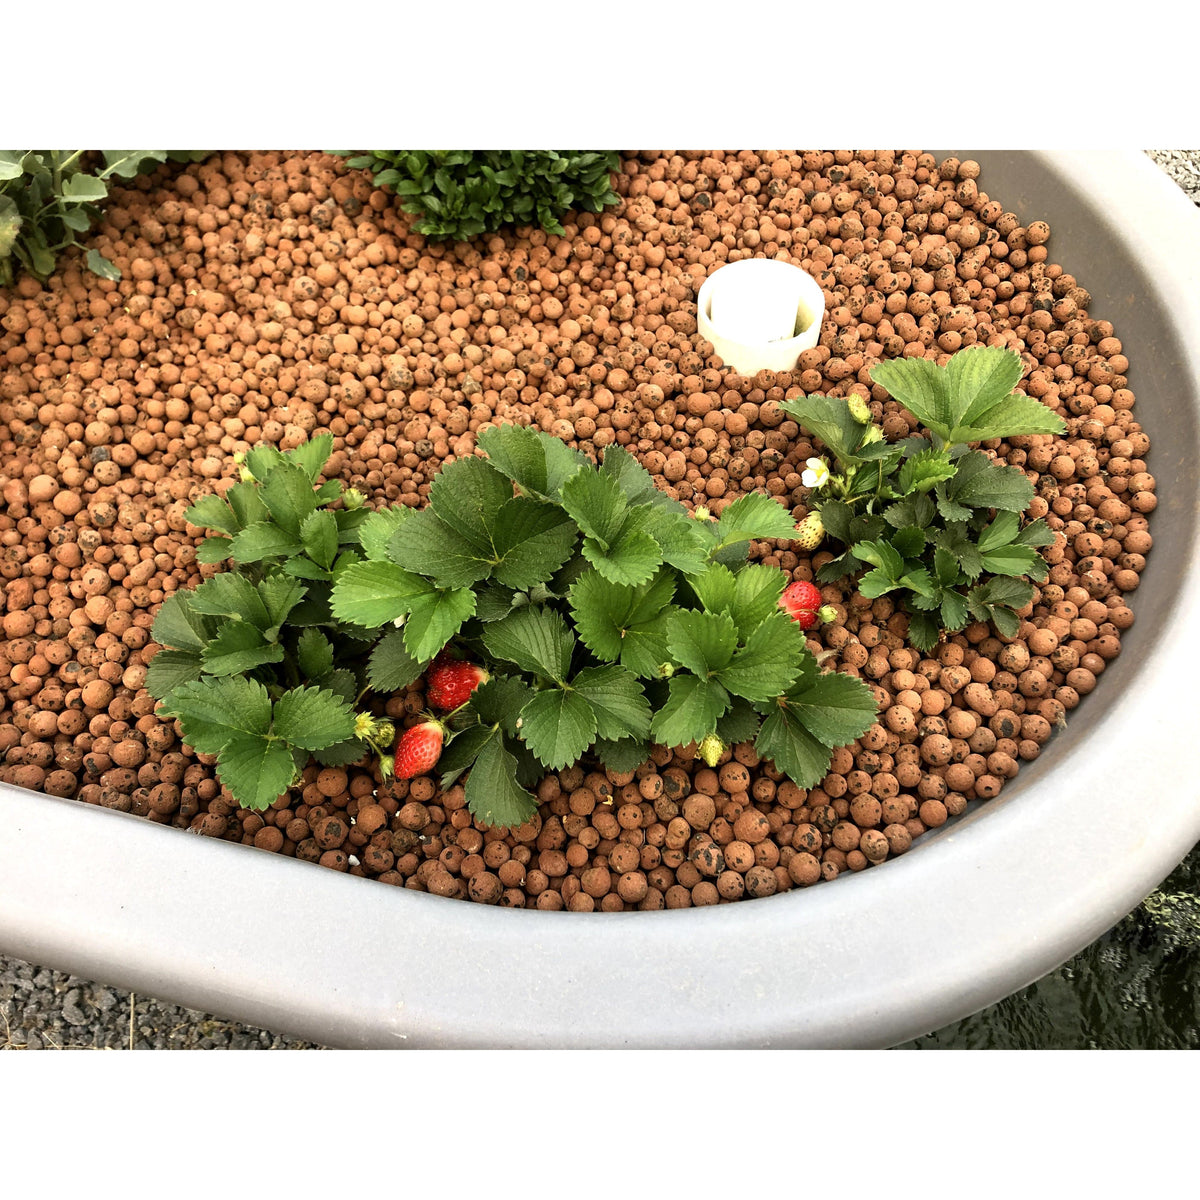 A garden utilizing the Go Green Aquaponics System, with strawberries planted in a bowl of gravel.